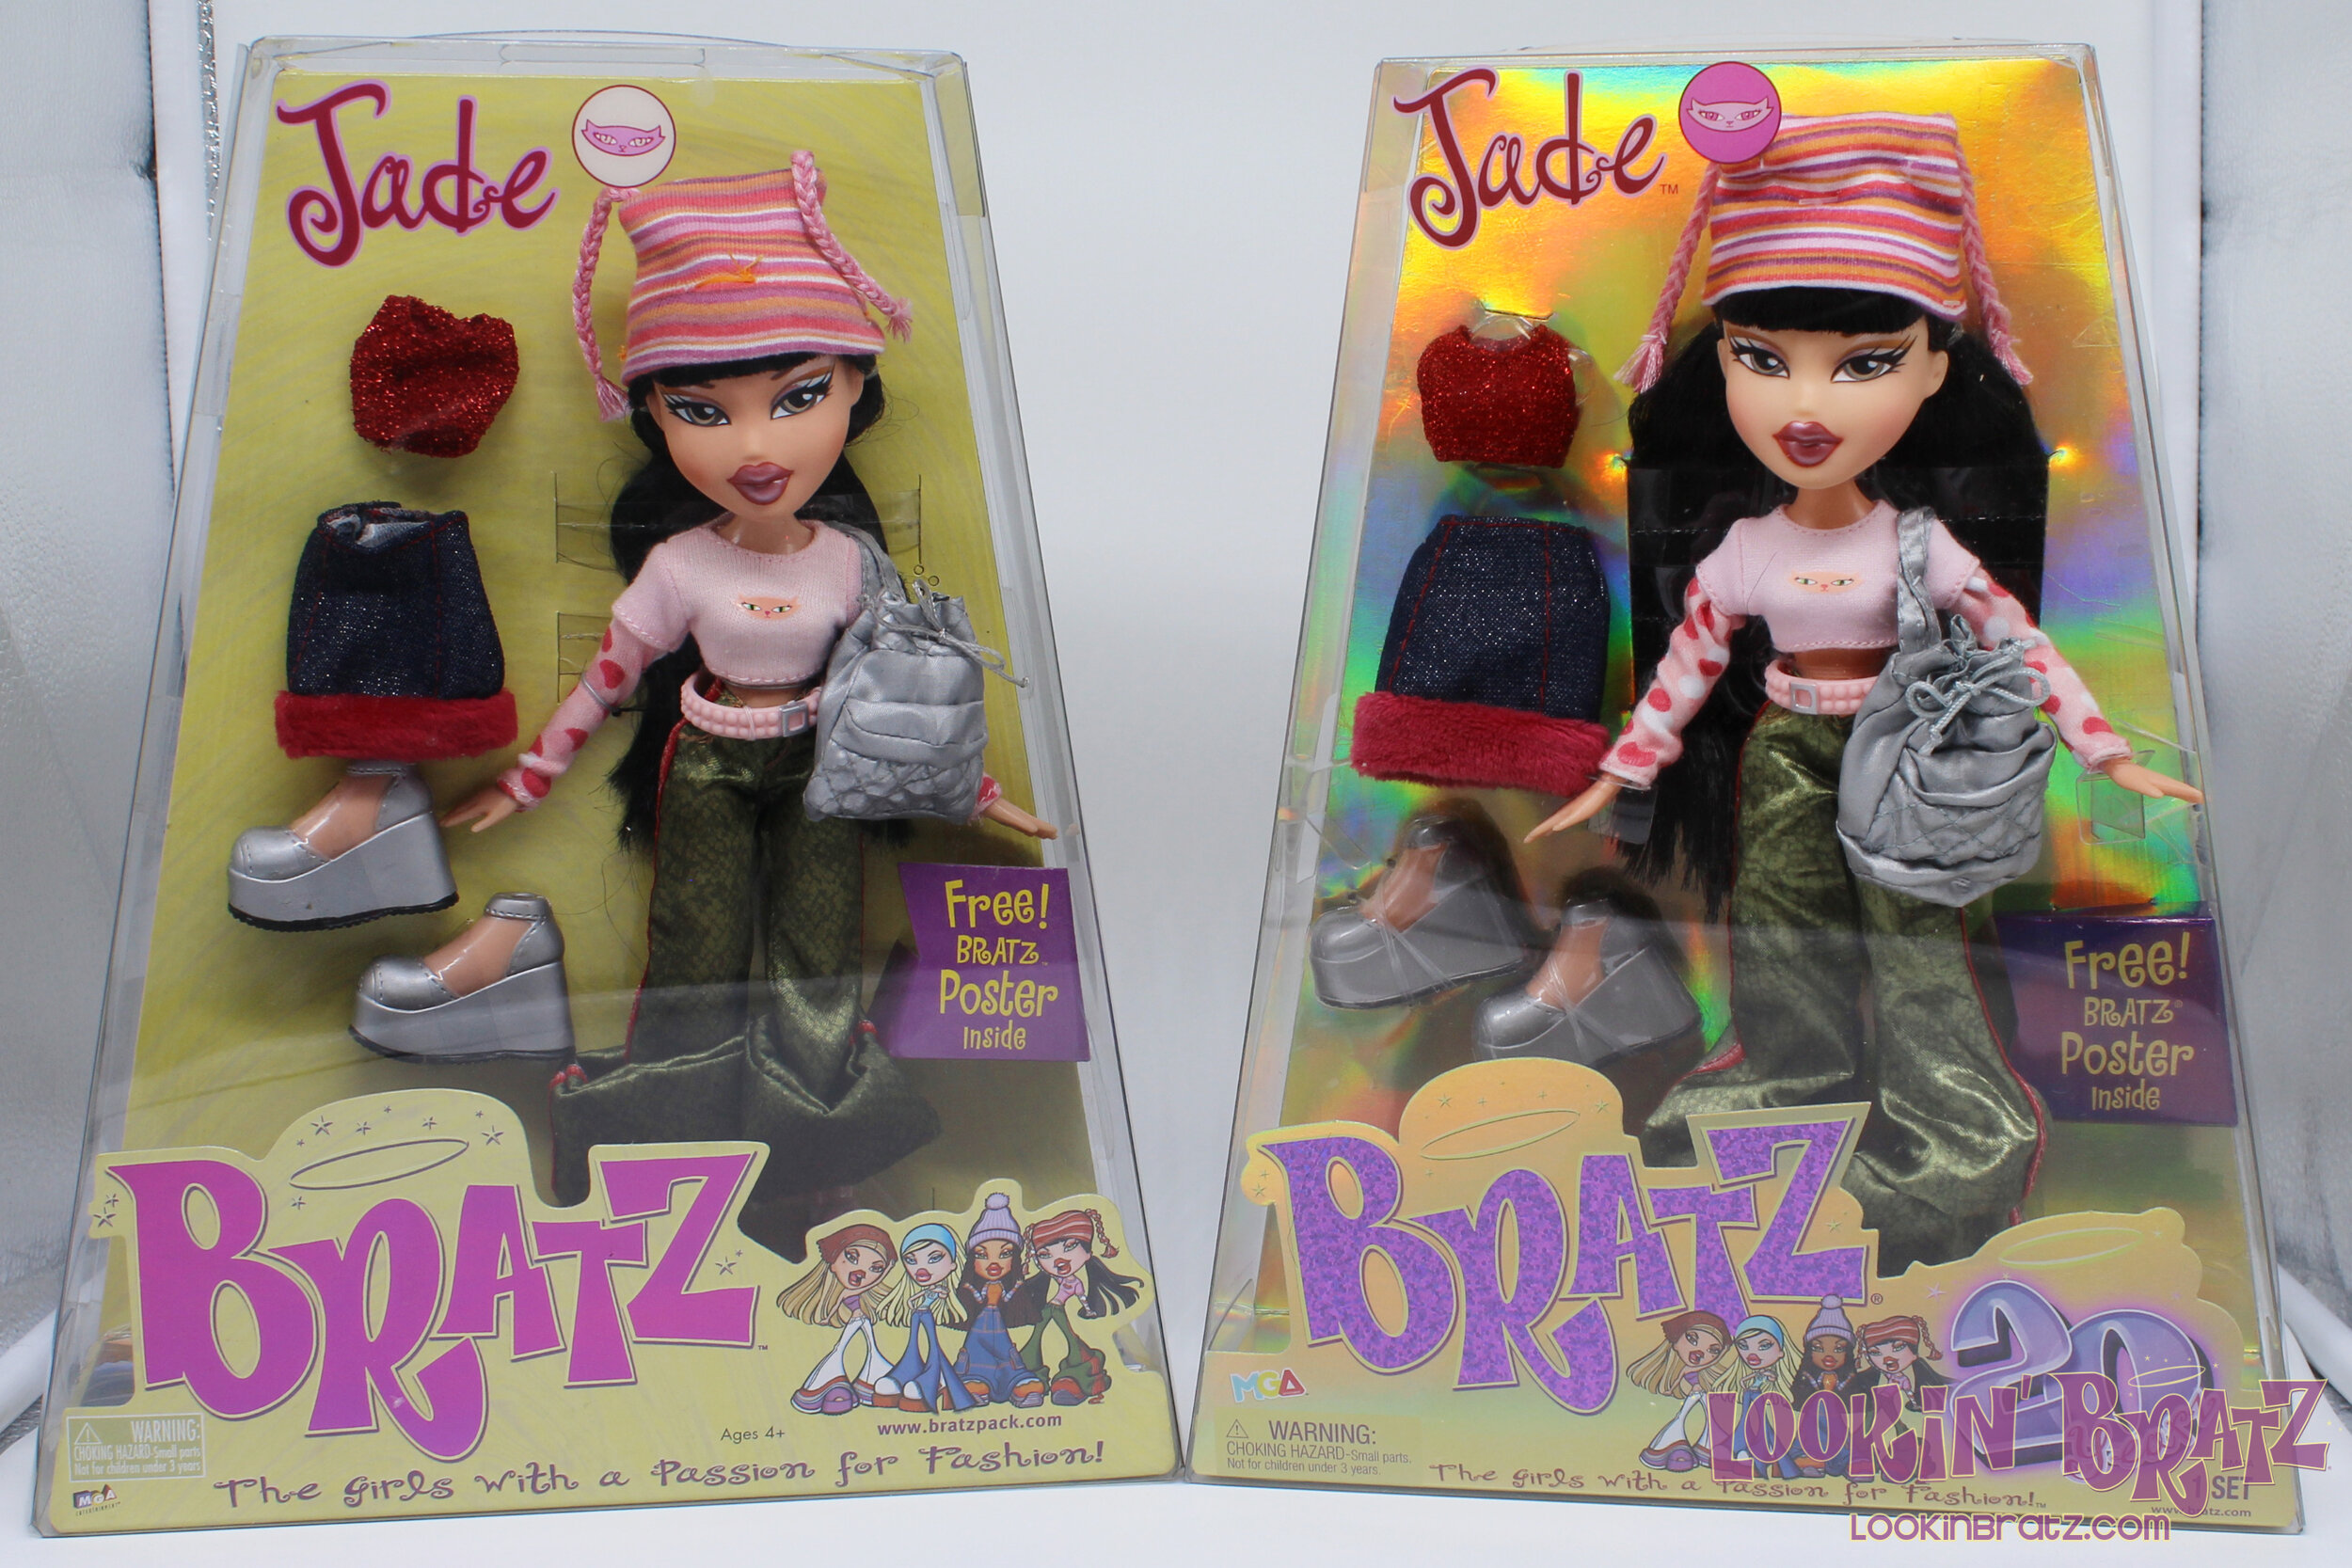 Bratz First Edition 2005 Re-Release vs. 2021 Re-Release Jade (Front)